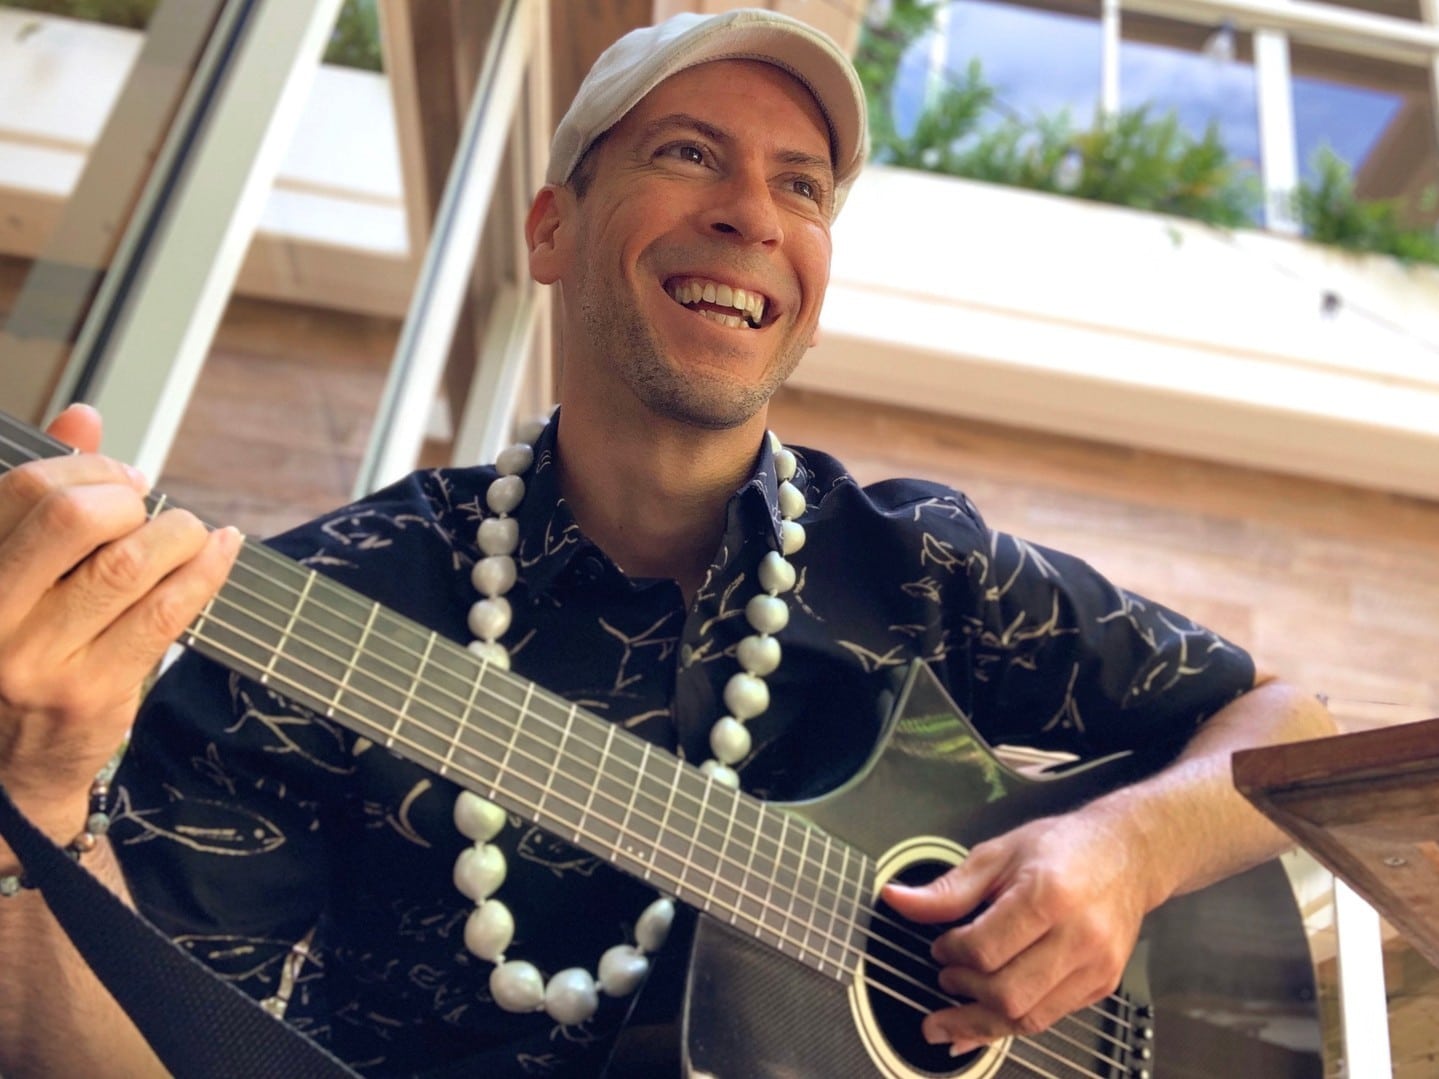 Our Aloha Friday Music series continues Friday, July 8 from 12pm-1pm. Grab lunch from a neighborhood eatery and enjoy Kamuela Kahoano performing live at South Shore Market. Click the link in our bio for more details.